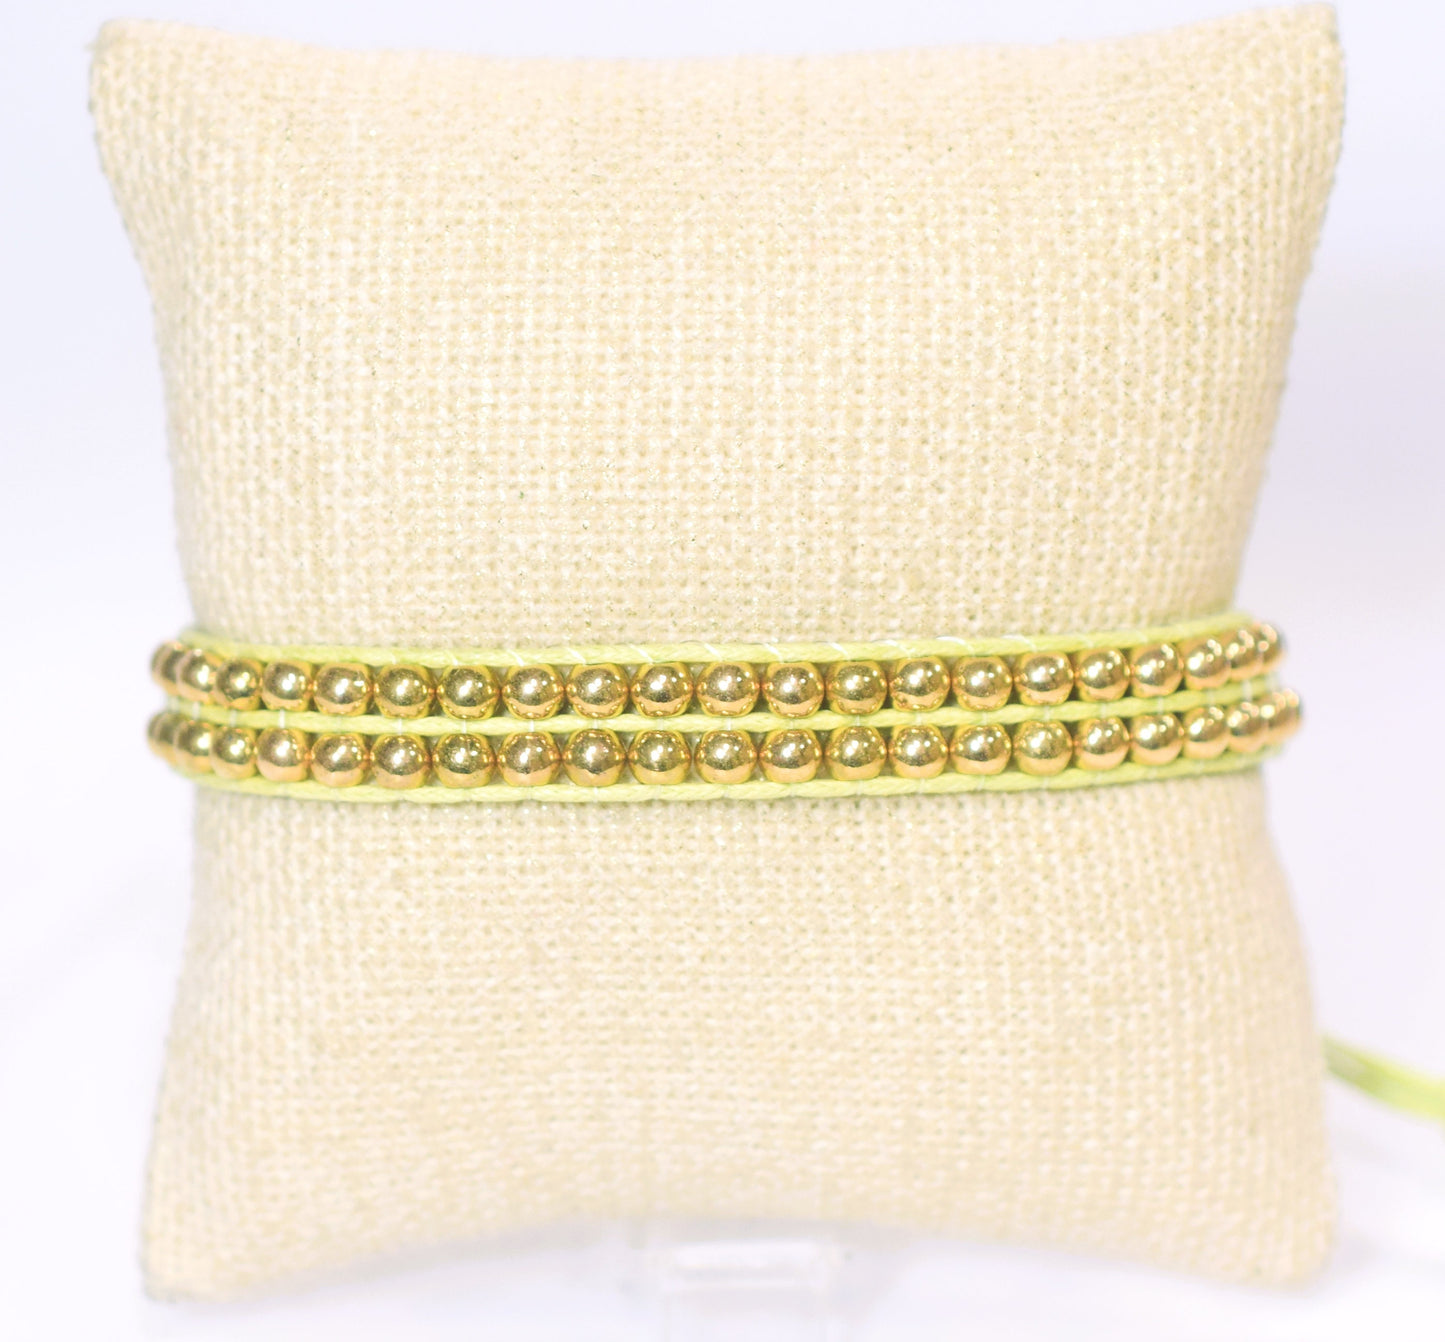 3 dollars for dozen Gold Beads 4mm Macrame Hand Made Bracelet 6 colors 56 Beads in one bracelet and wholesale